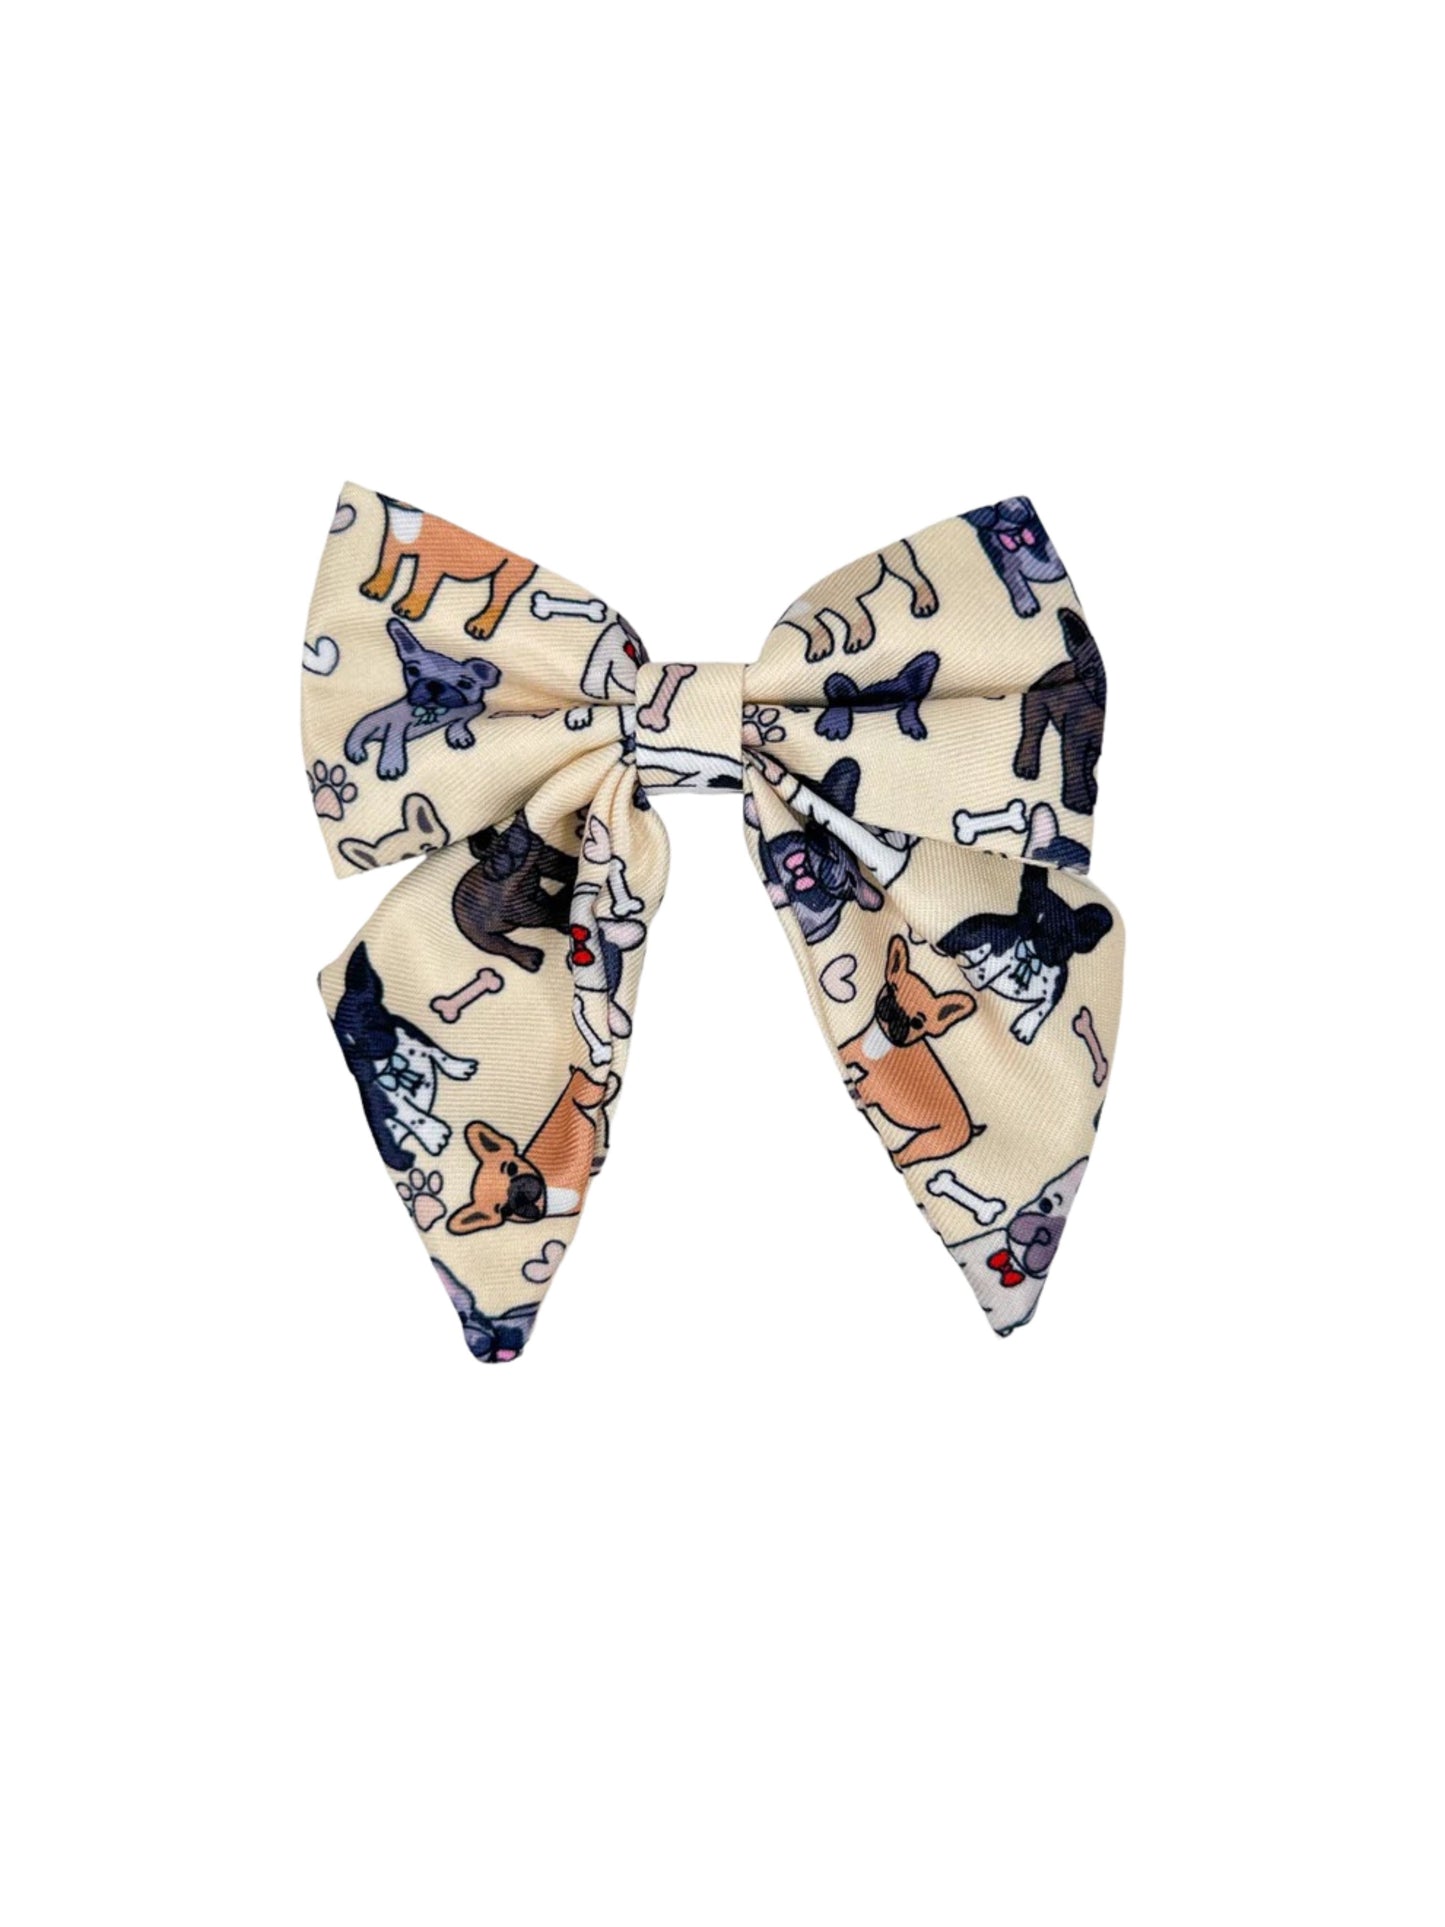 The French Bulldog Bow Tie